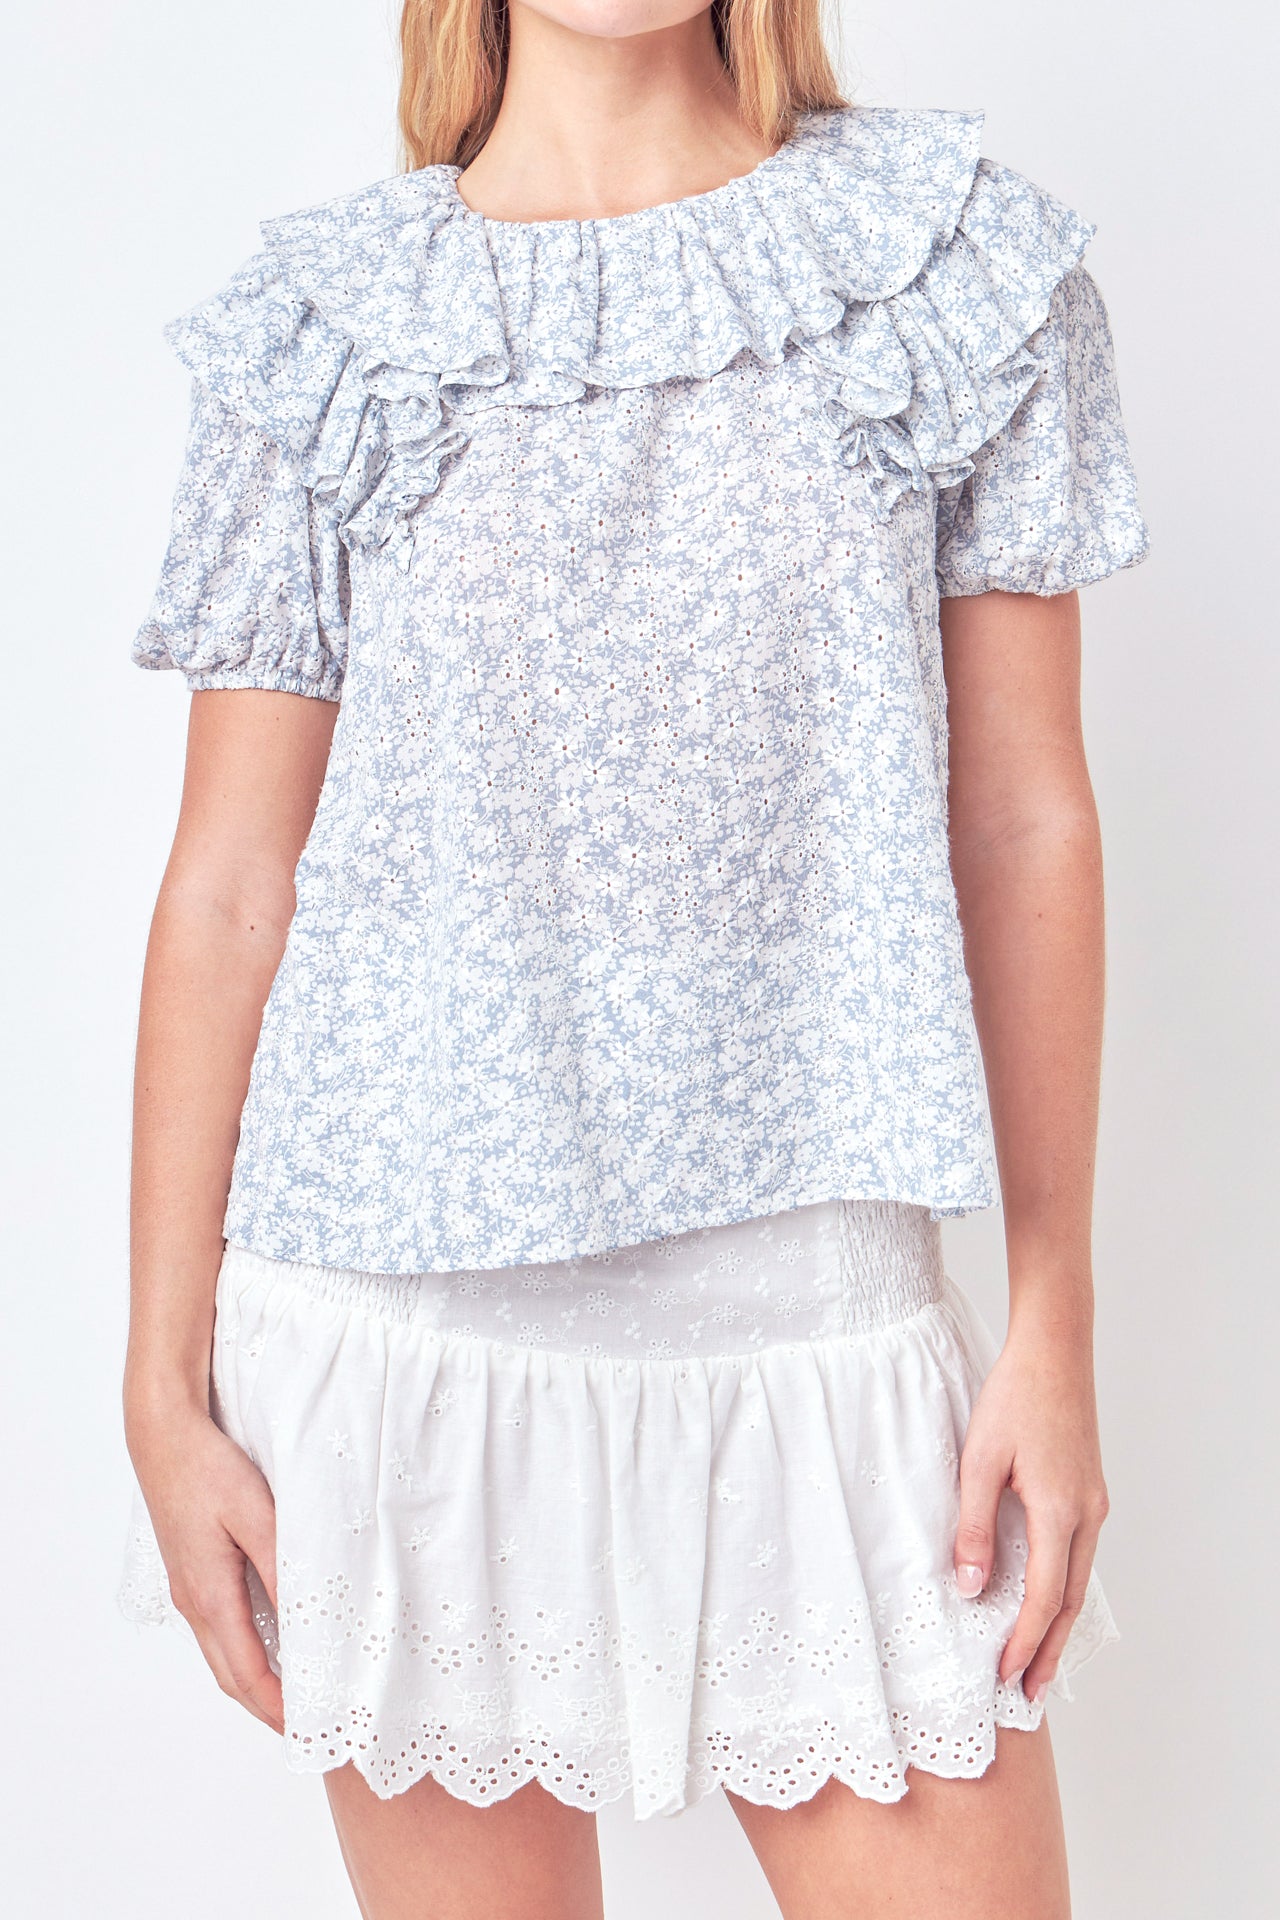 FREE THE ROSES - Floral Print Ruffle Top with Puff Sleeves - TOPS available at Objectrare